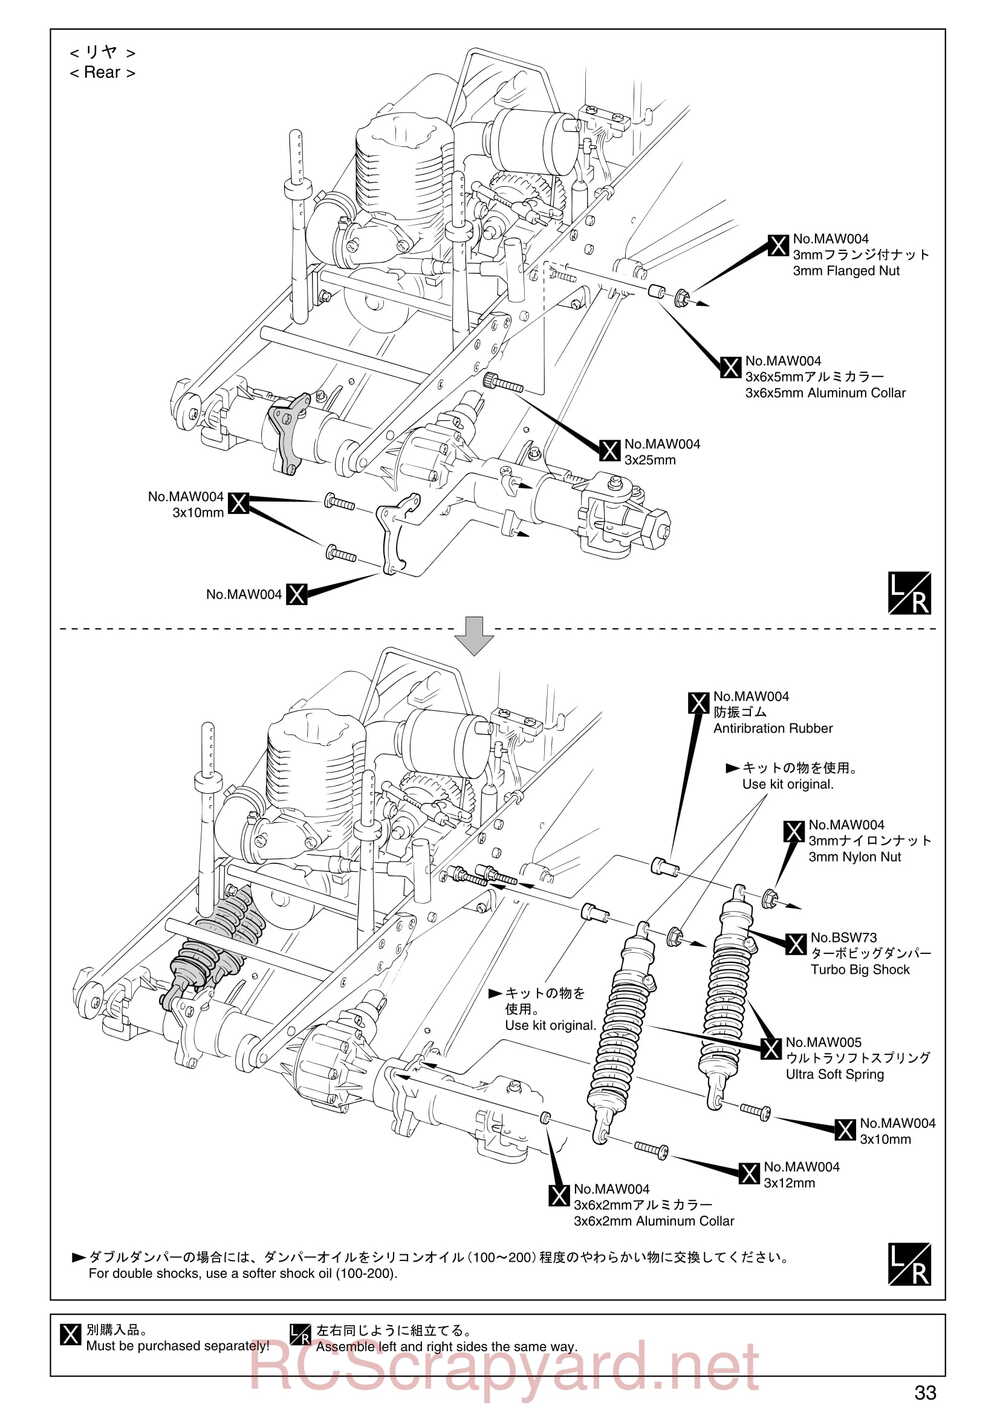 Kyosho - 31224 - Mad-Armour - Manual - Page 33